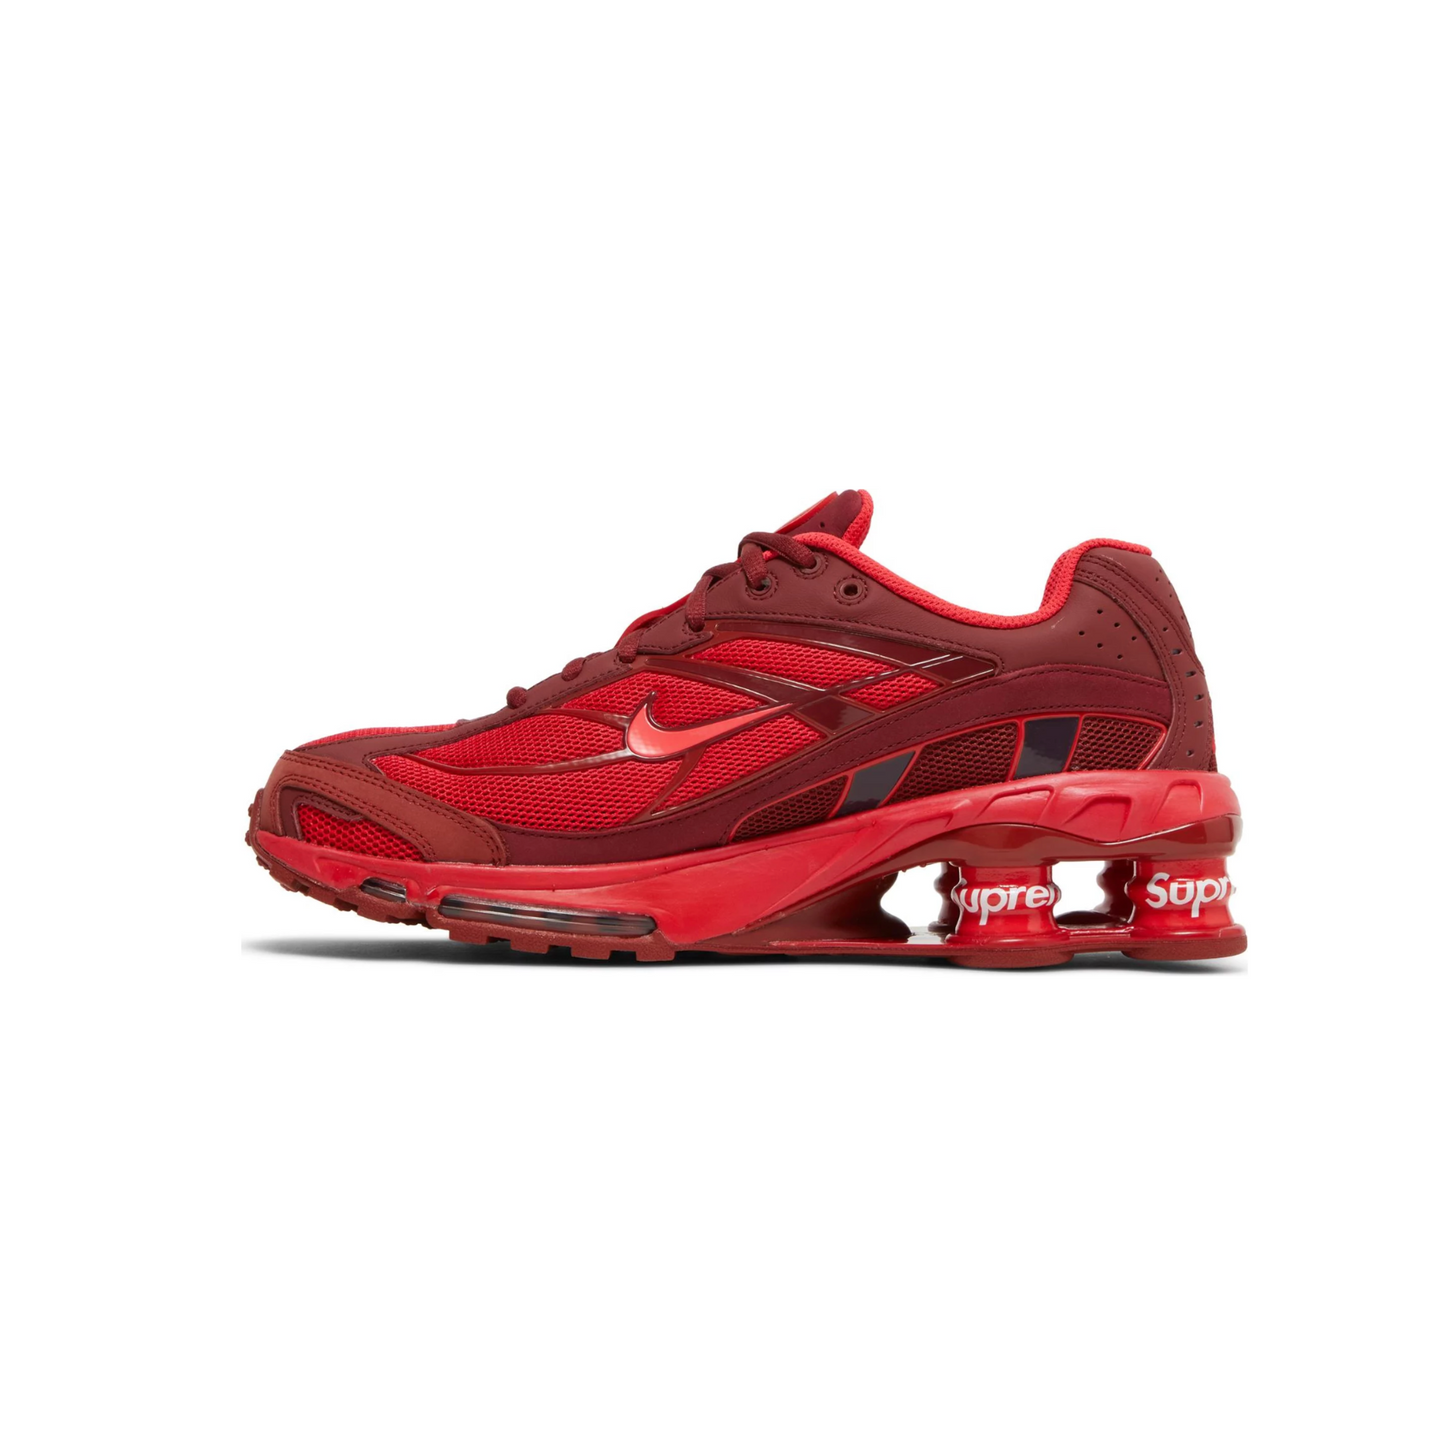 THE SUPREME X NIKE SHOX RIDE 2 'SPEED RED'